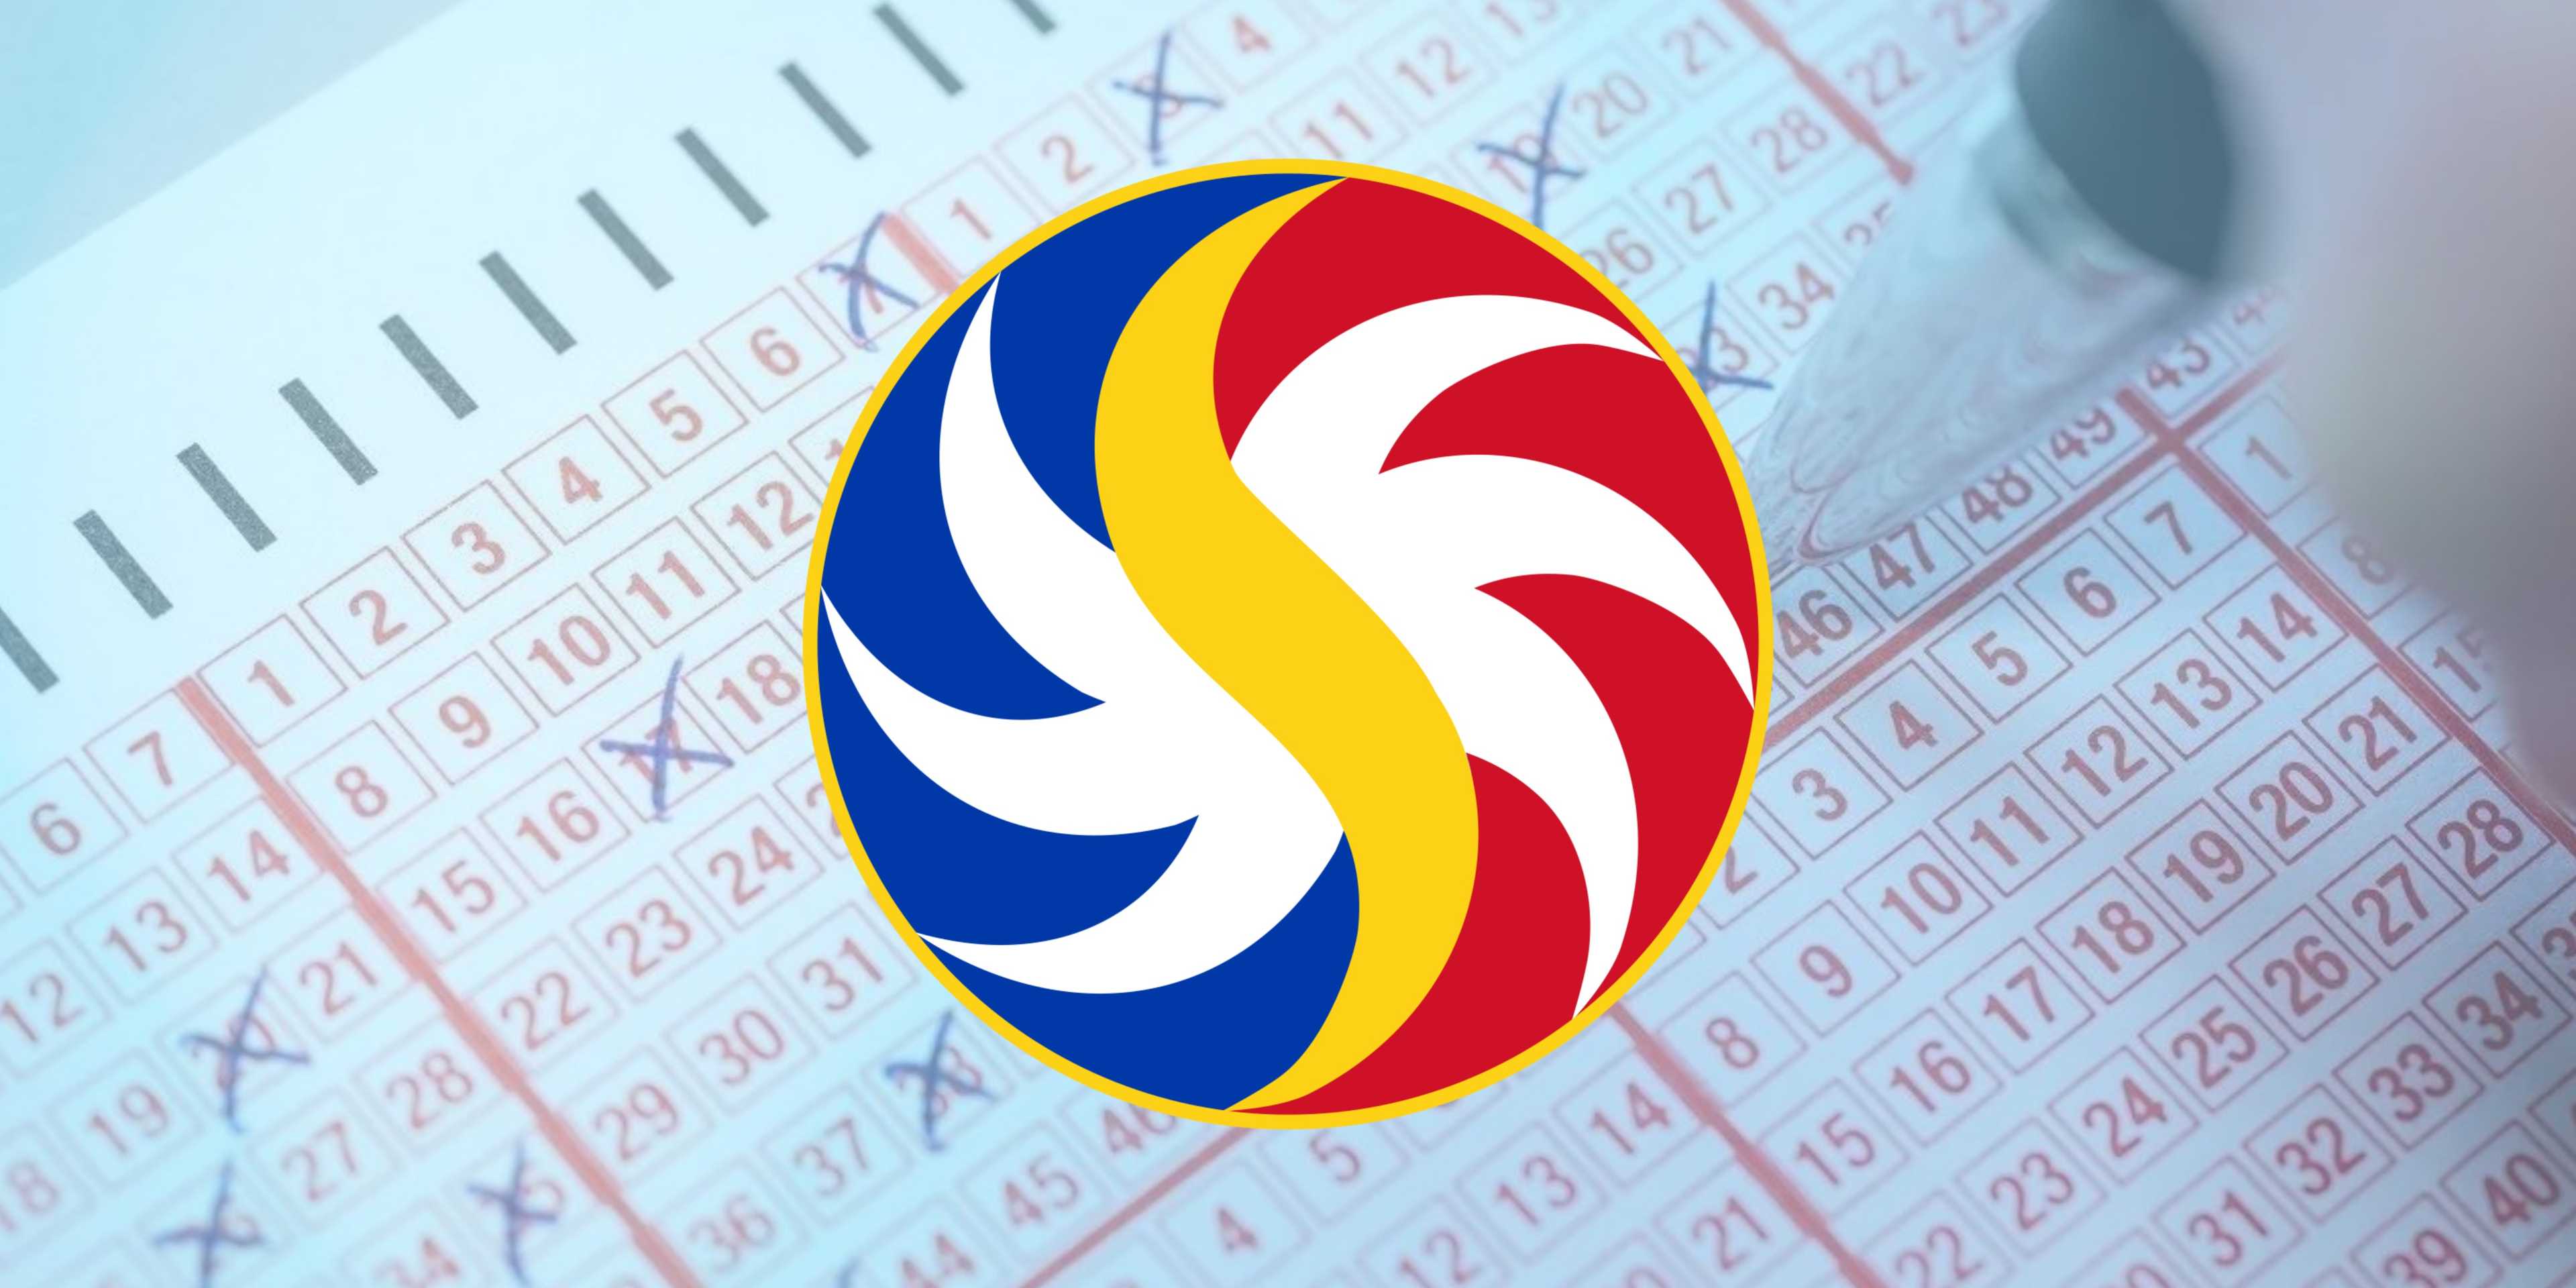 PCSO Lotto Draw Results on Friday, March 22